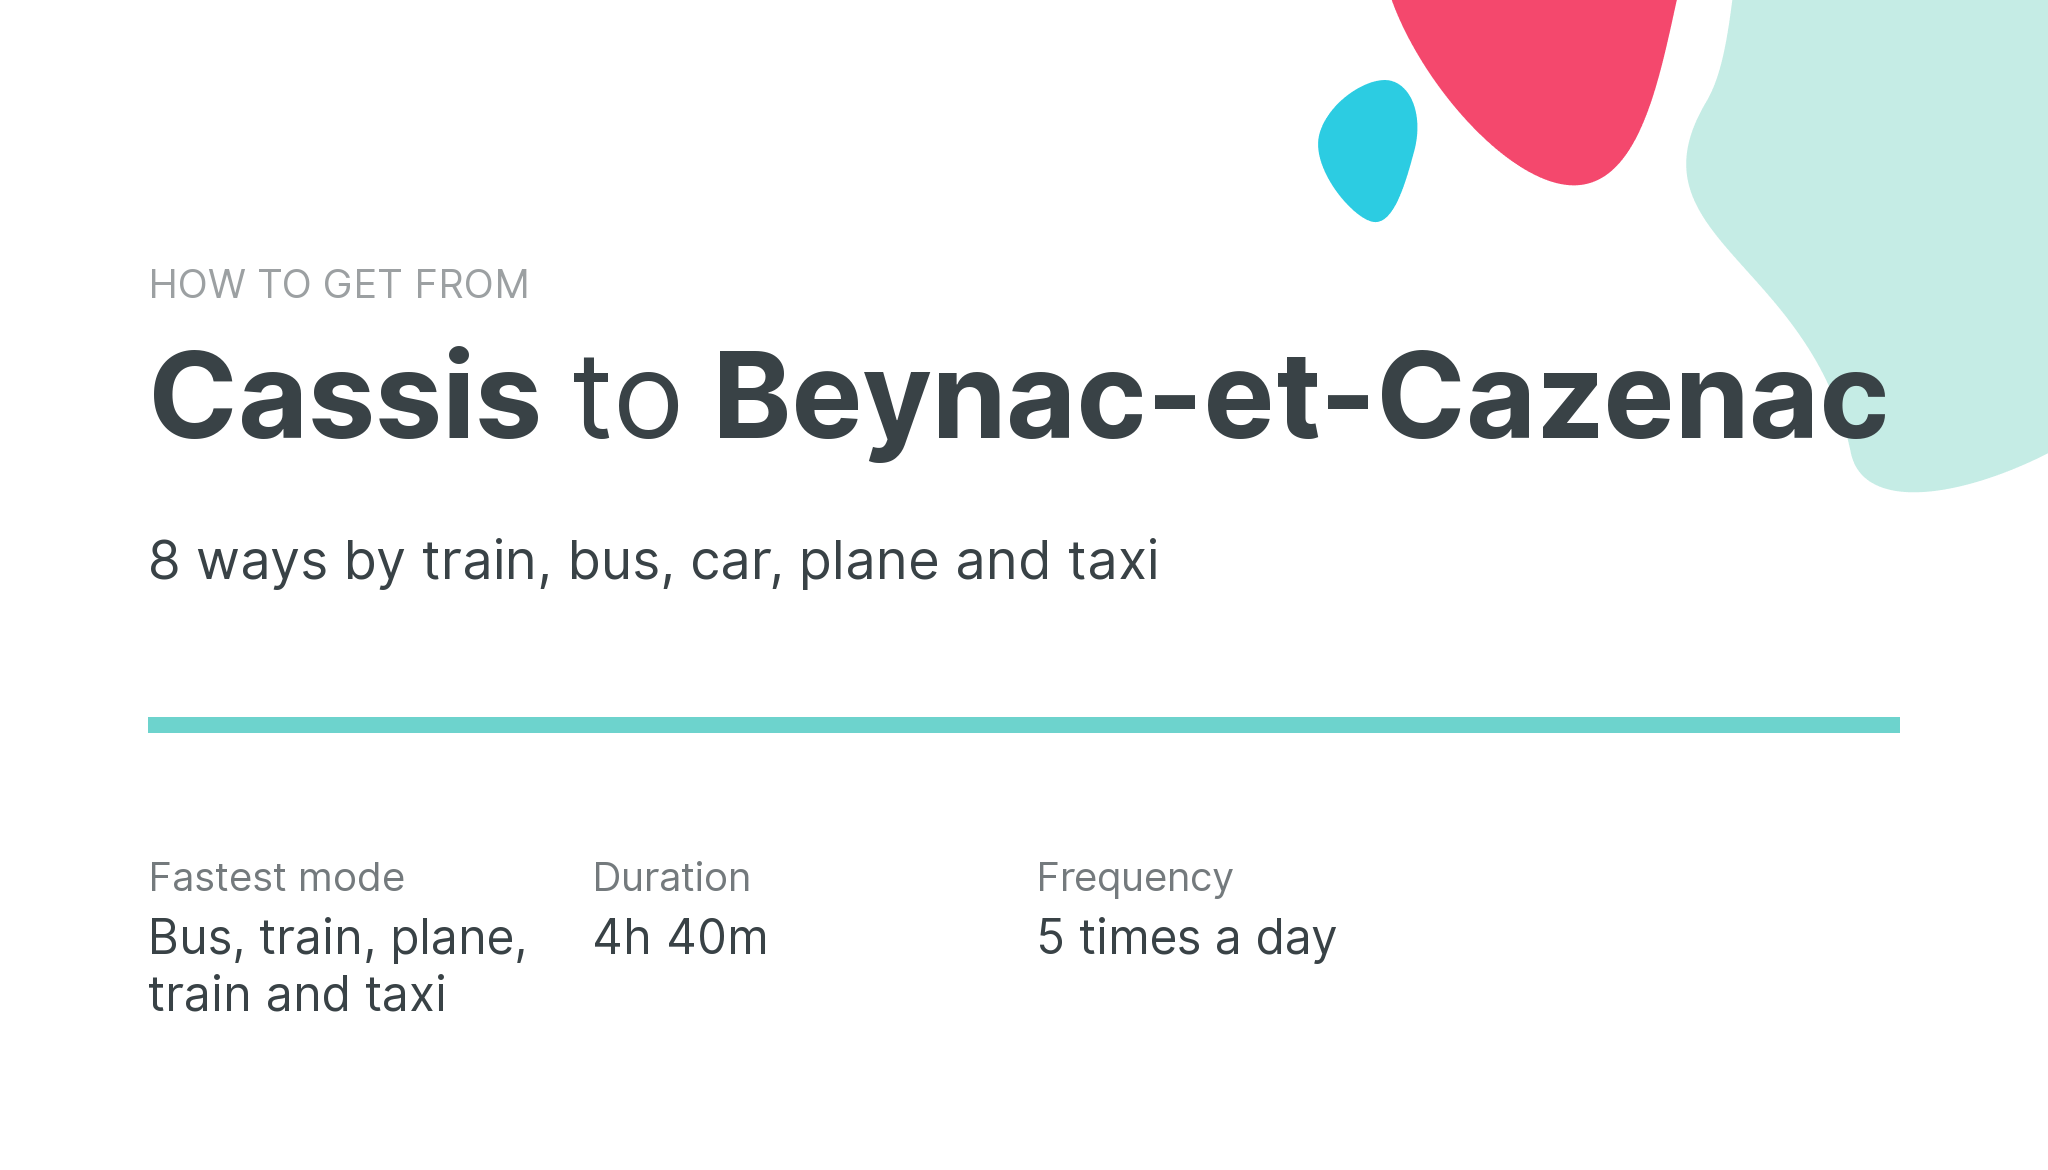 How do I get from Cassis to Beynac-et-Cazenac